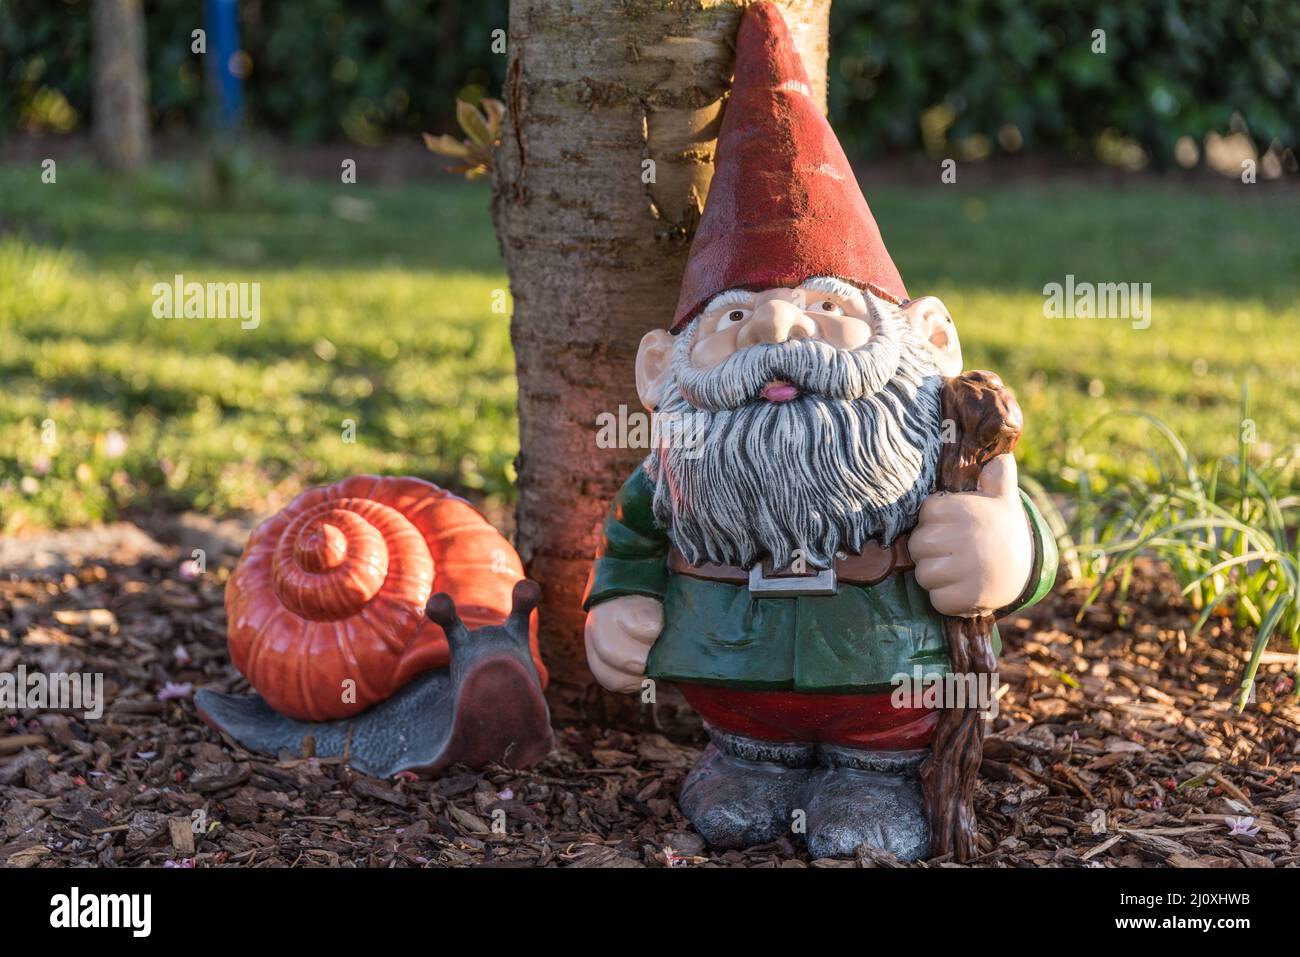 Painted dwarf and snail in the garden as decoration Stock Photo